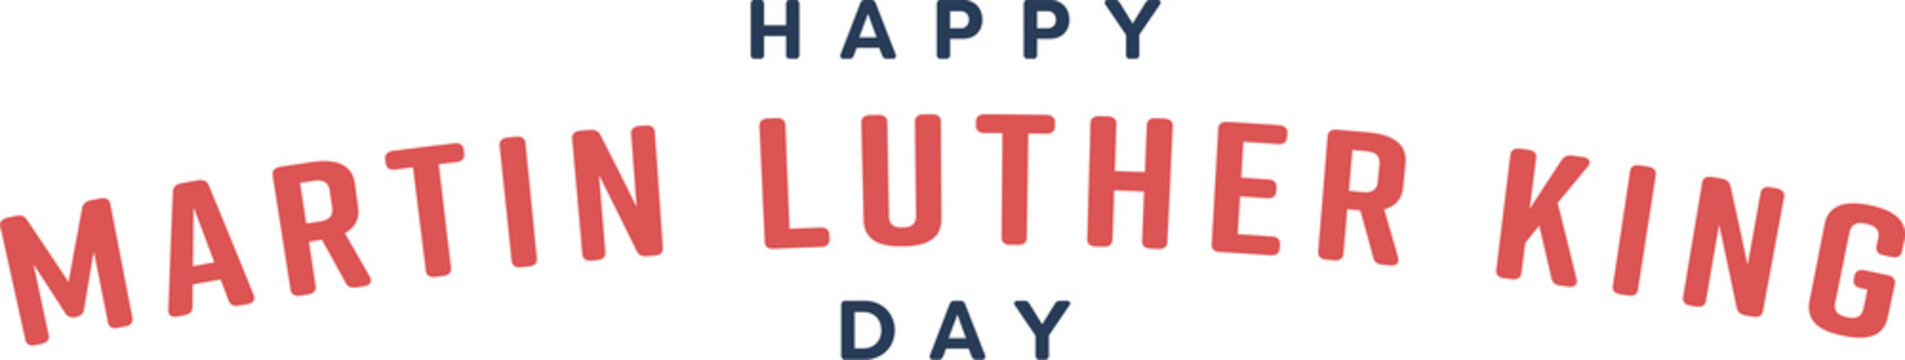 Digital png text of happy martin luther king day on transparent background